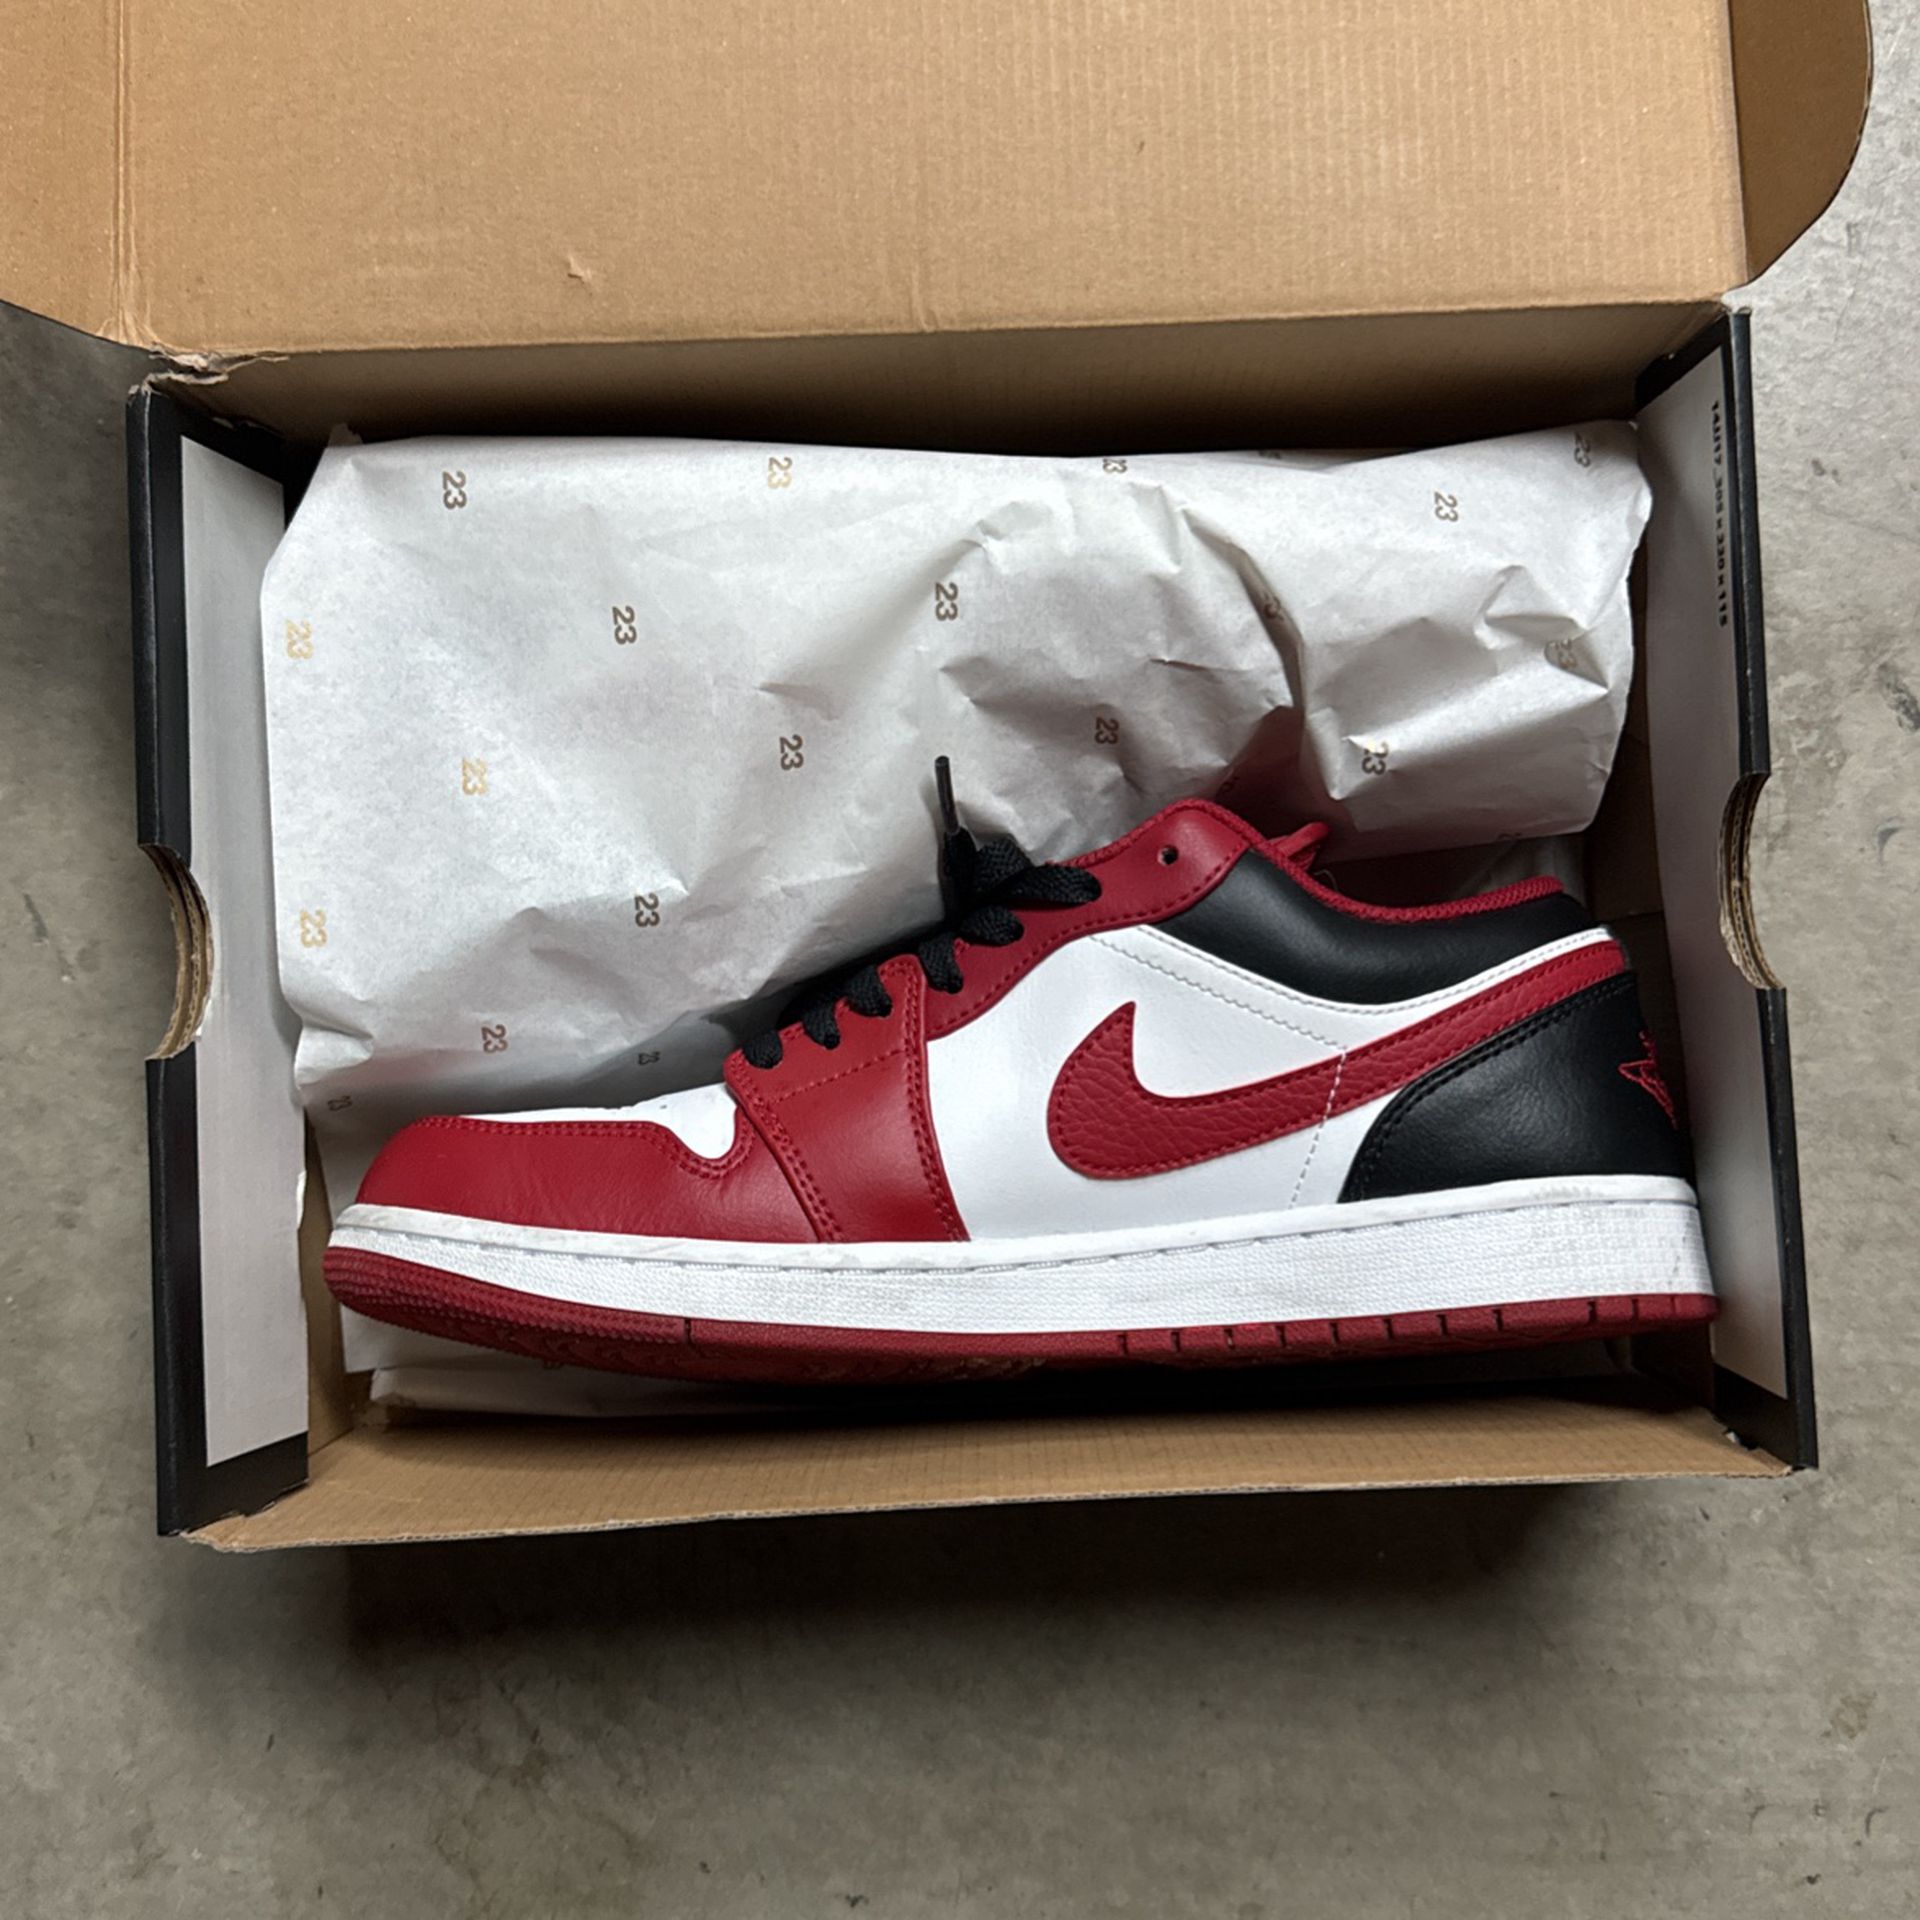 Jordan 1  Red Whit And Black Size 9.5